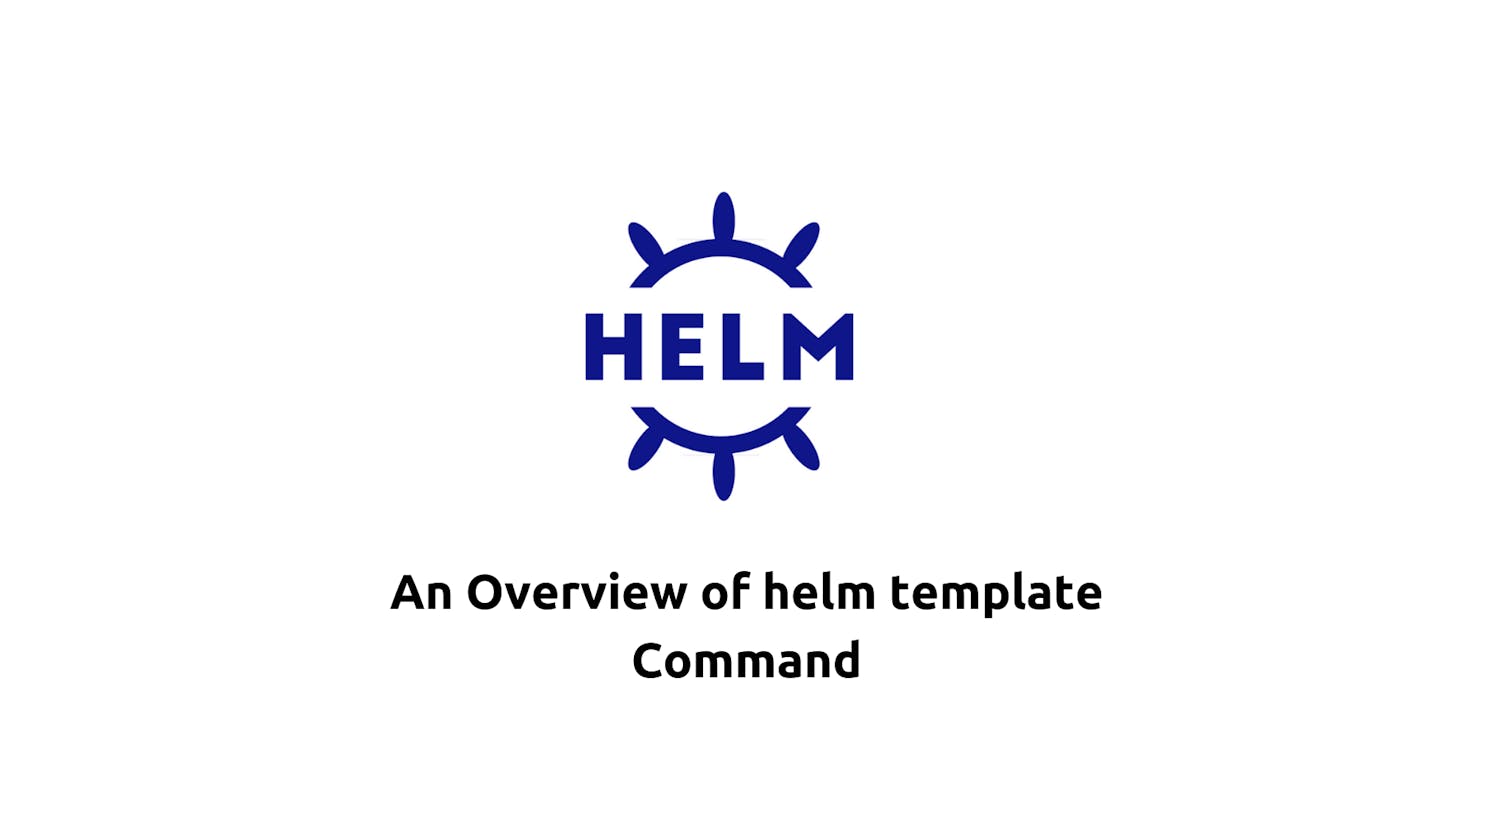 An Overview of helm template Command